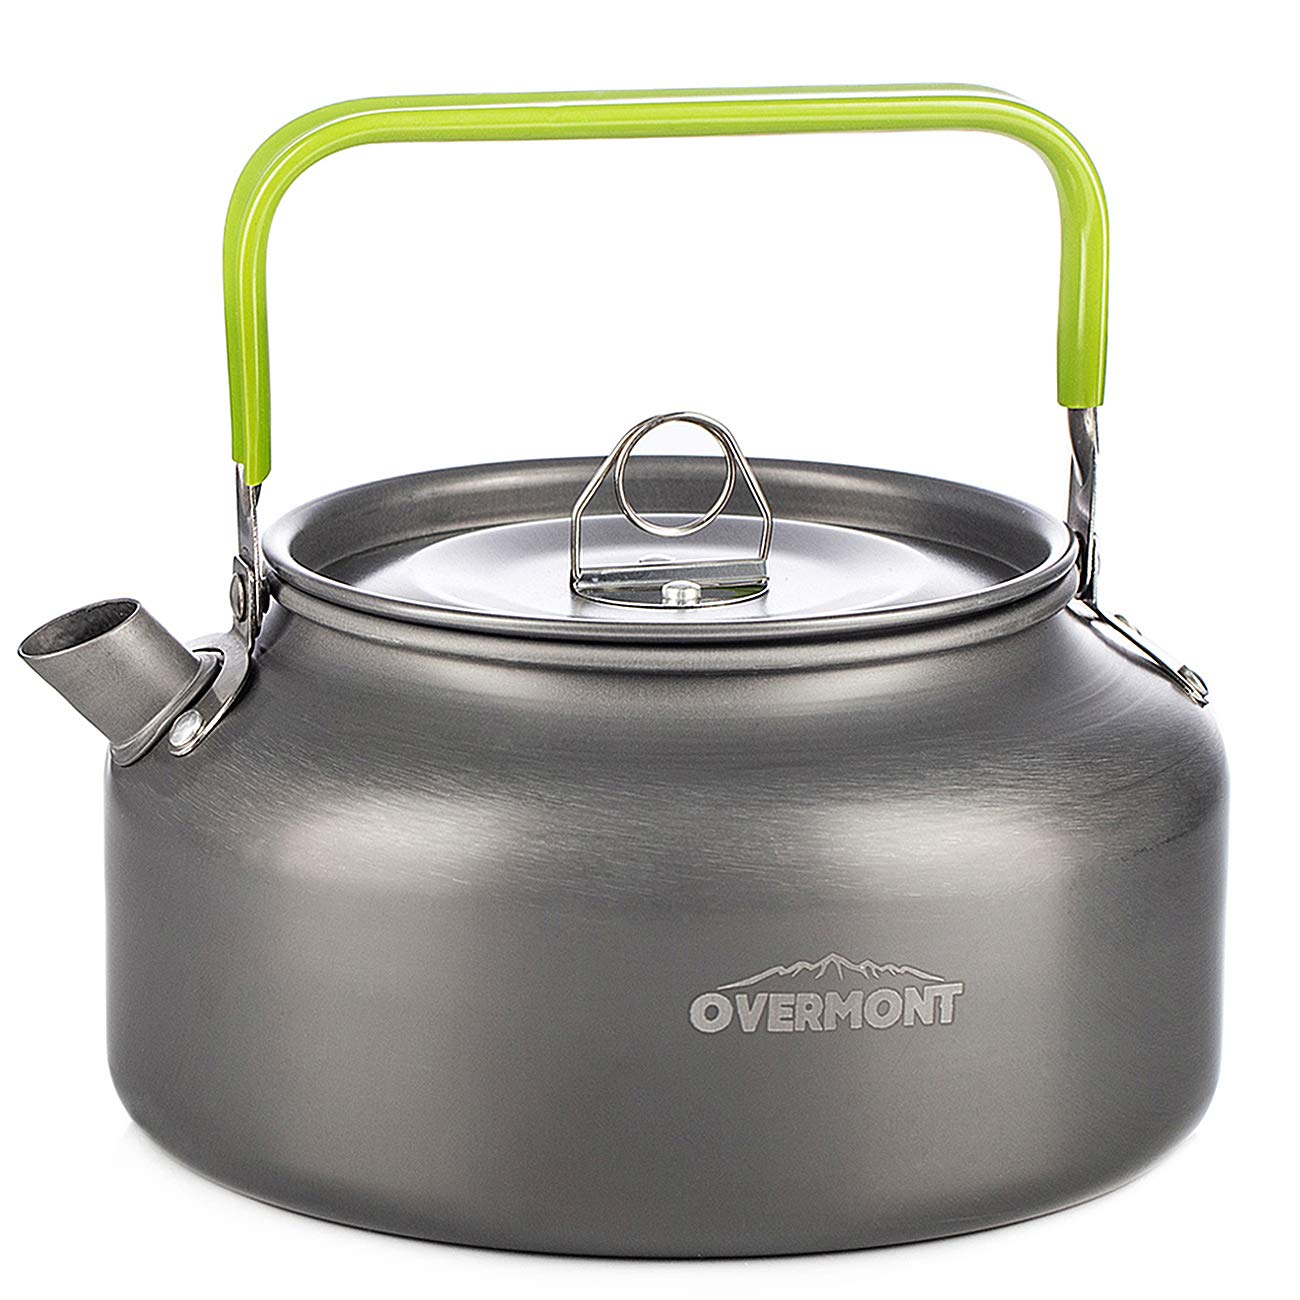 Overmont Camping Kettle Camp Tea Coffee Pot Aluminum 42 FL OZ Outdoor  Hiking Gear Portable Teapot Lightweight with Silicon Handle 1.2Medium